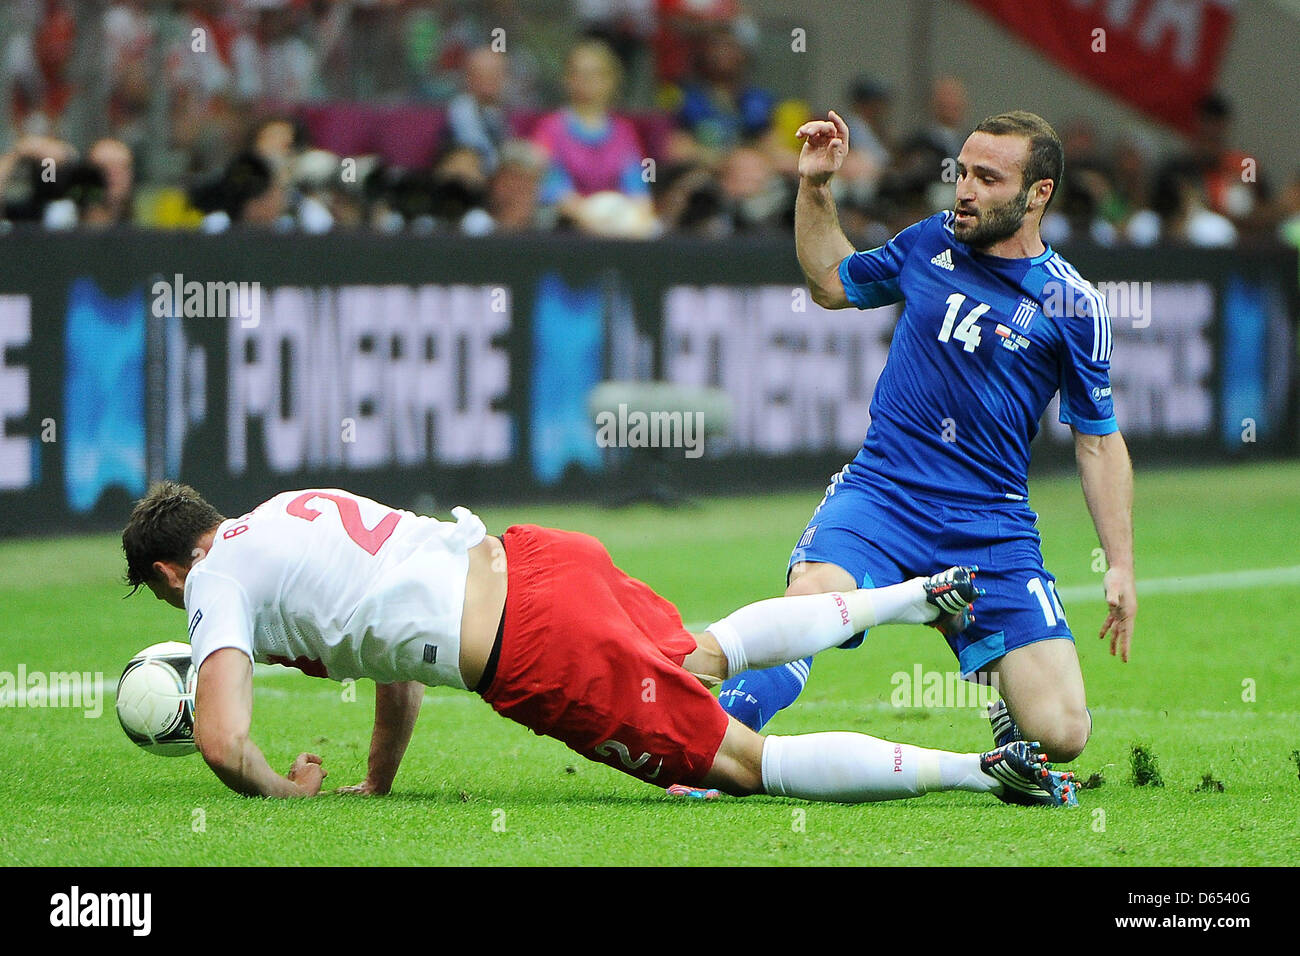 Poland's Sebastian Boenisch (L) vies for the ball with Greece's Dimitris Salpingidis during the UEFA Euro 2012 match between Poland and Greece at the national stadium in Warsaw, Poland, 08 June 2012. Photo: Pressfocus / Revierfoto Stock Photo